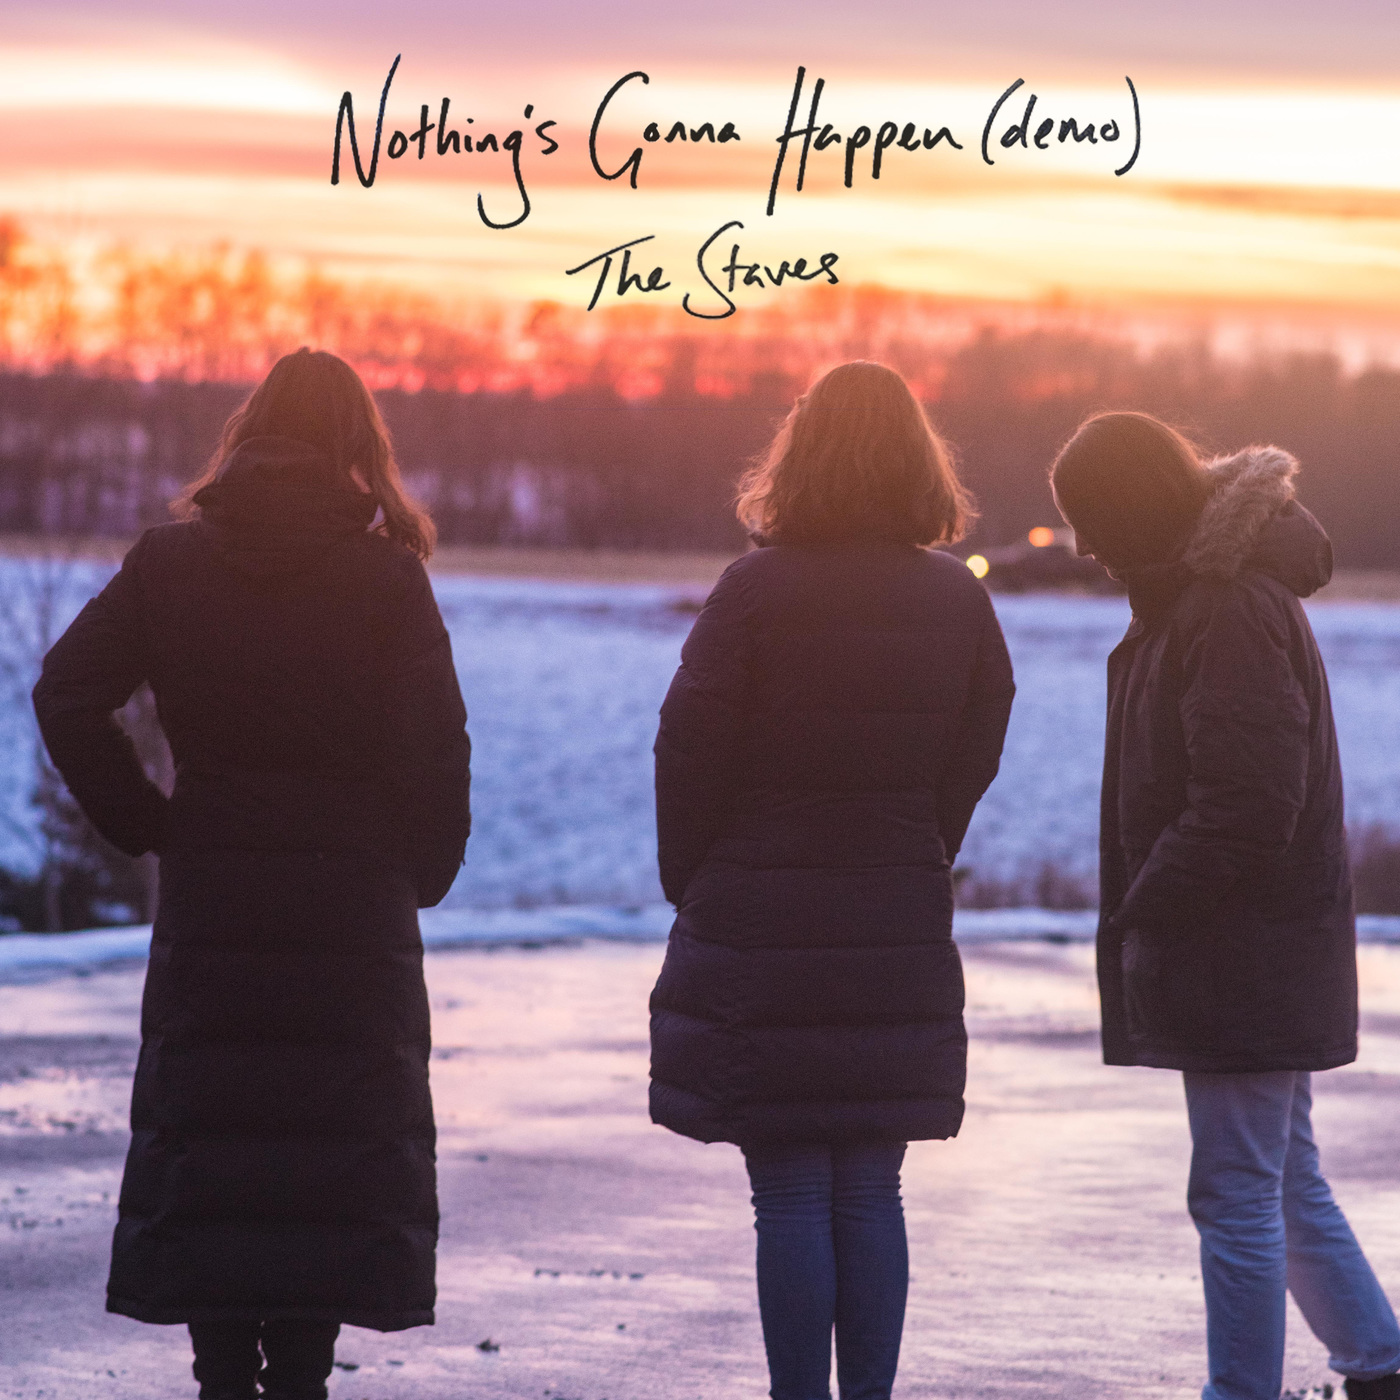 Album Art for "Nothing's Gonna Happen (Demo)" by The Staves